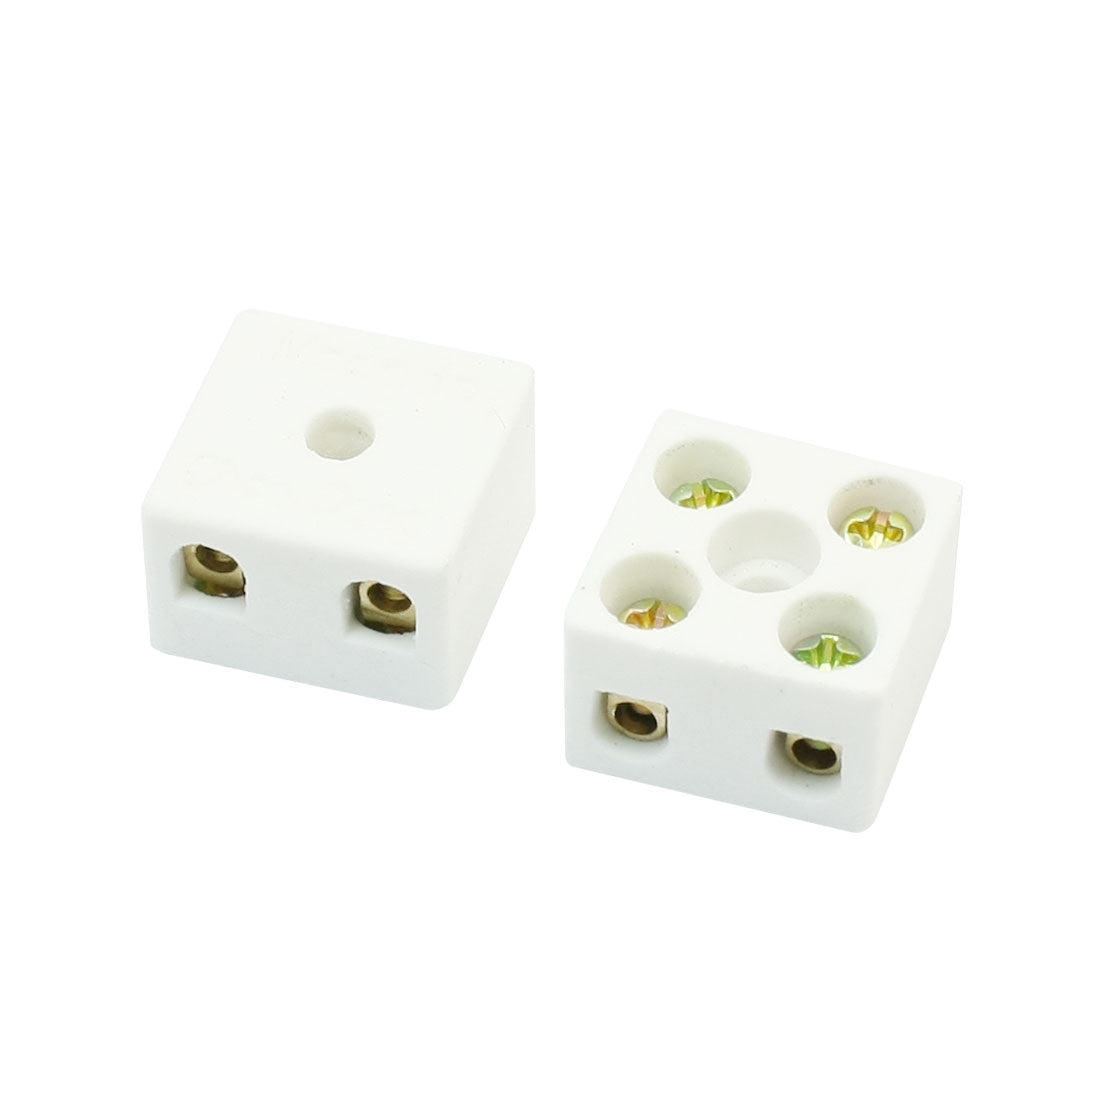 uxcell Uxcell 10A 380V Insulation Connector Porcelain Ceramic Terminal Block 2W5H 2Pcs